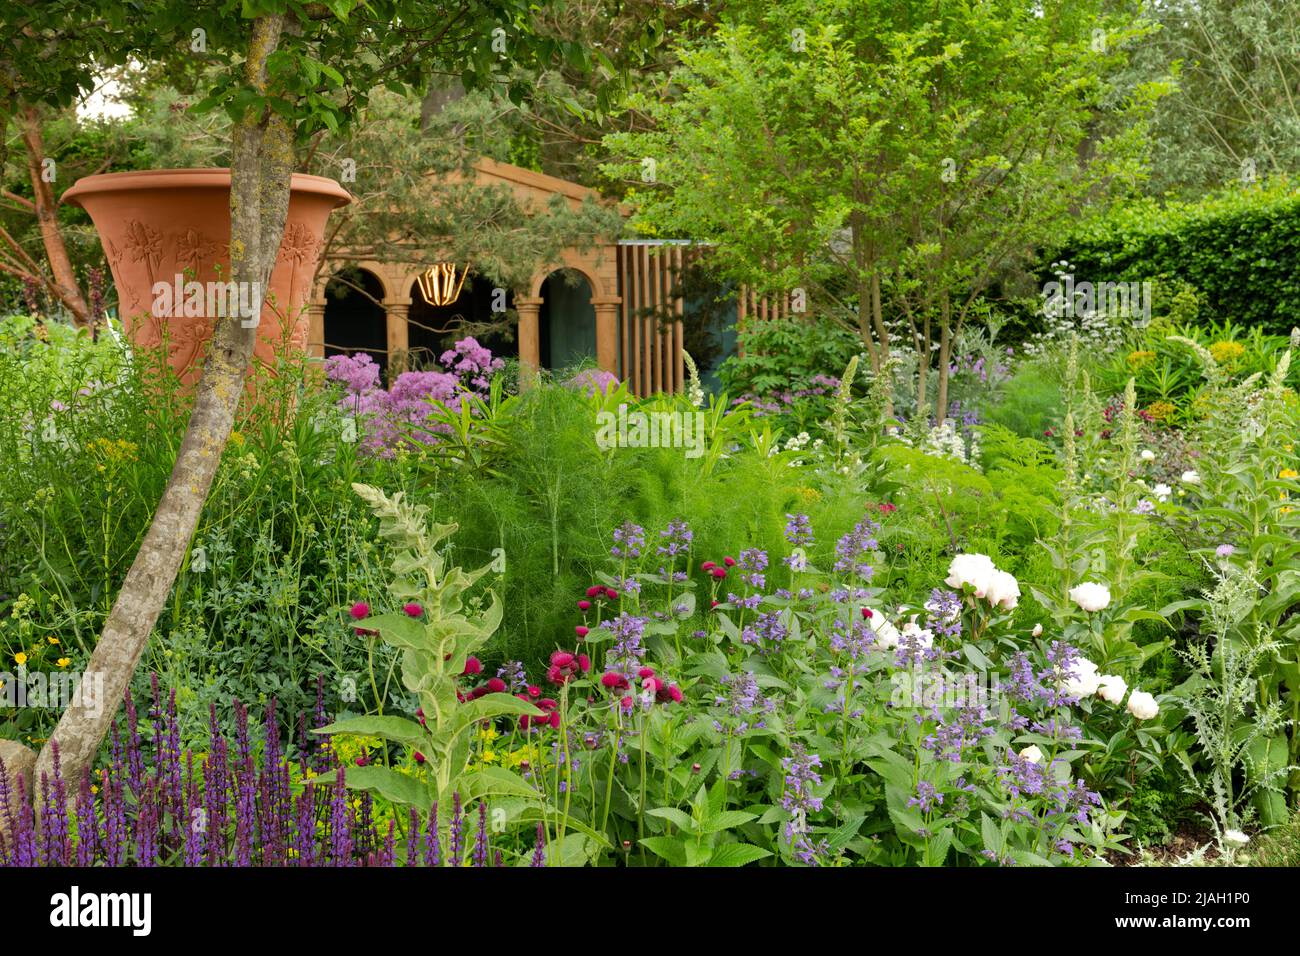 A large decorative urn and a classical style oak pavilion surrounded by lush herbaceous borders, trees and stone paving in the RNLI Garden designed by Stock Photo